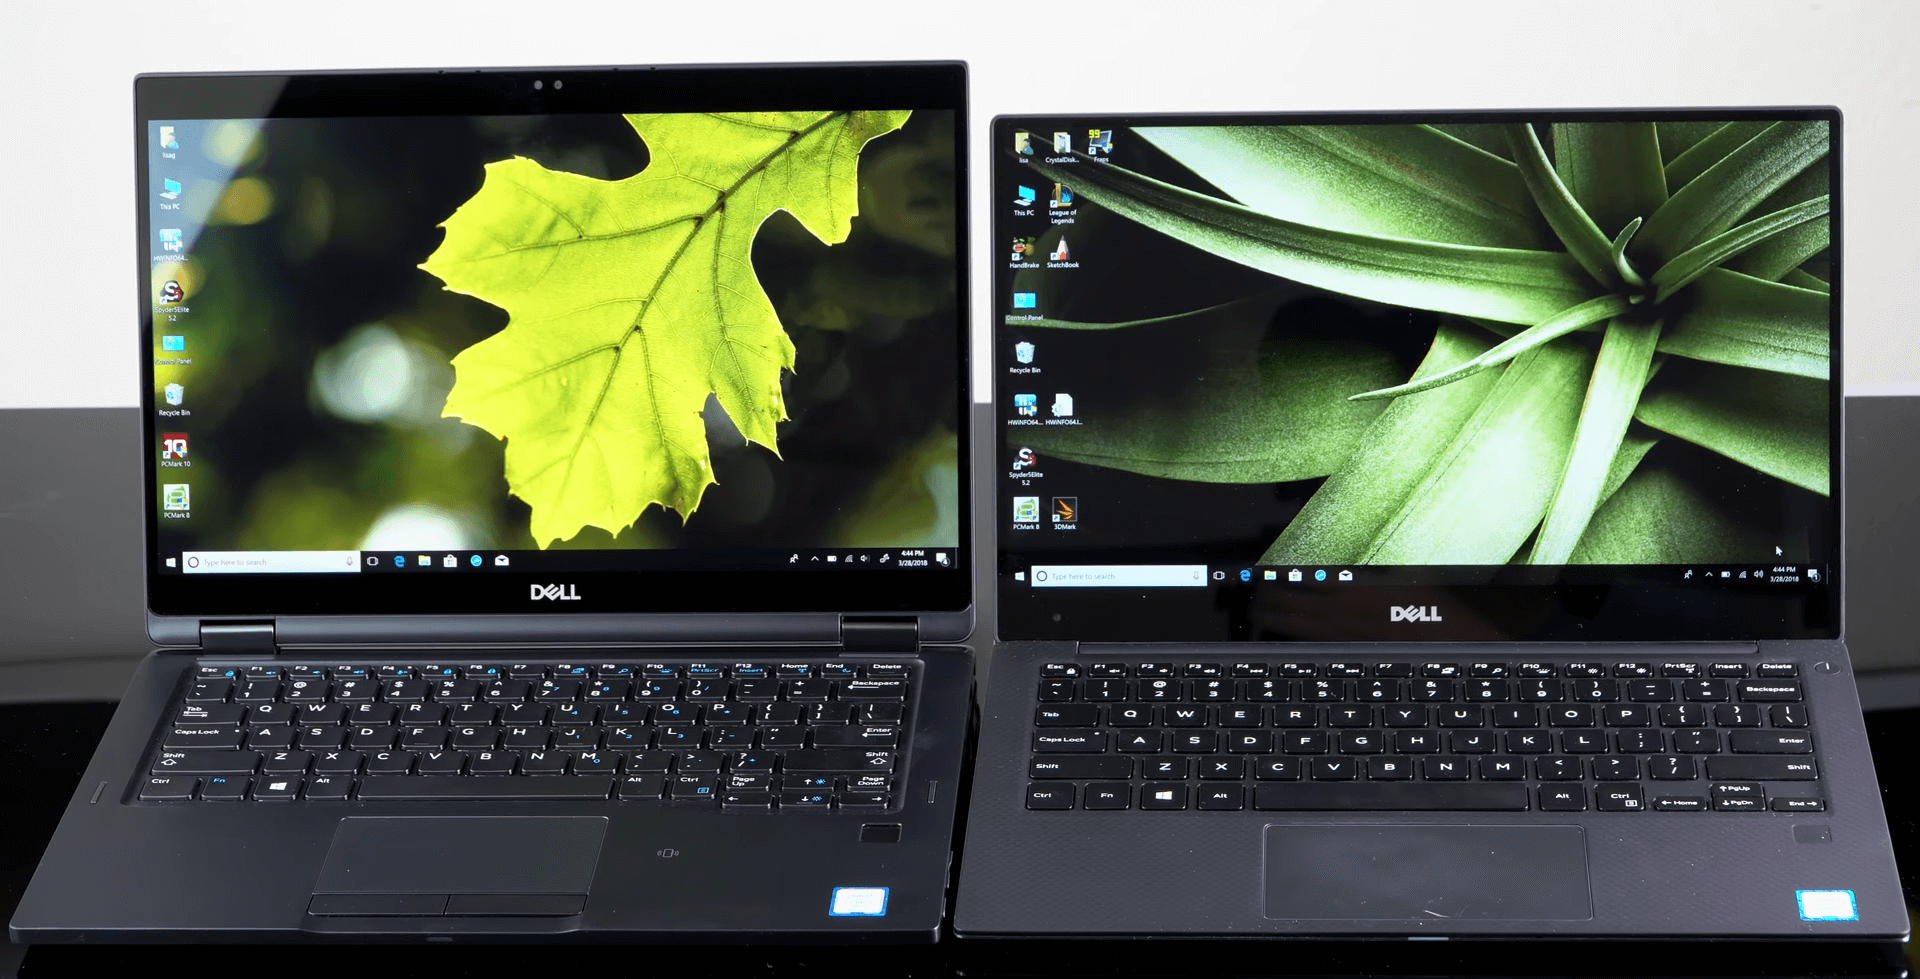 Dell XPS 7390 Vs Latitude 7390: Which 2-in-1 Laptop is Better?